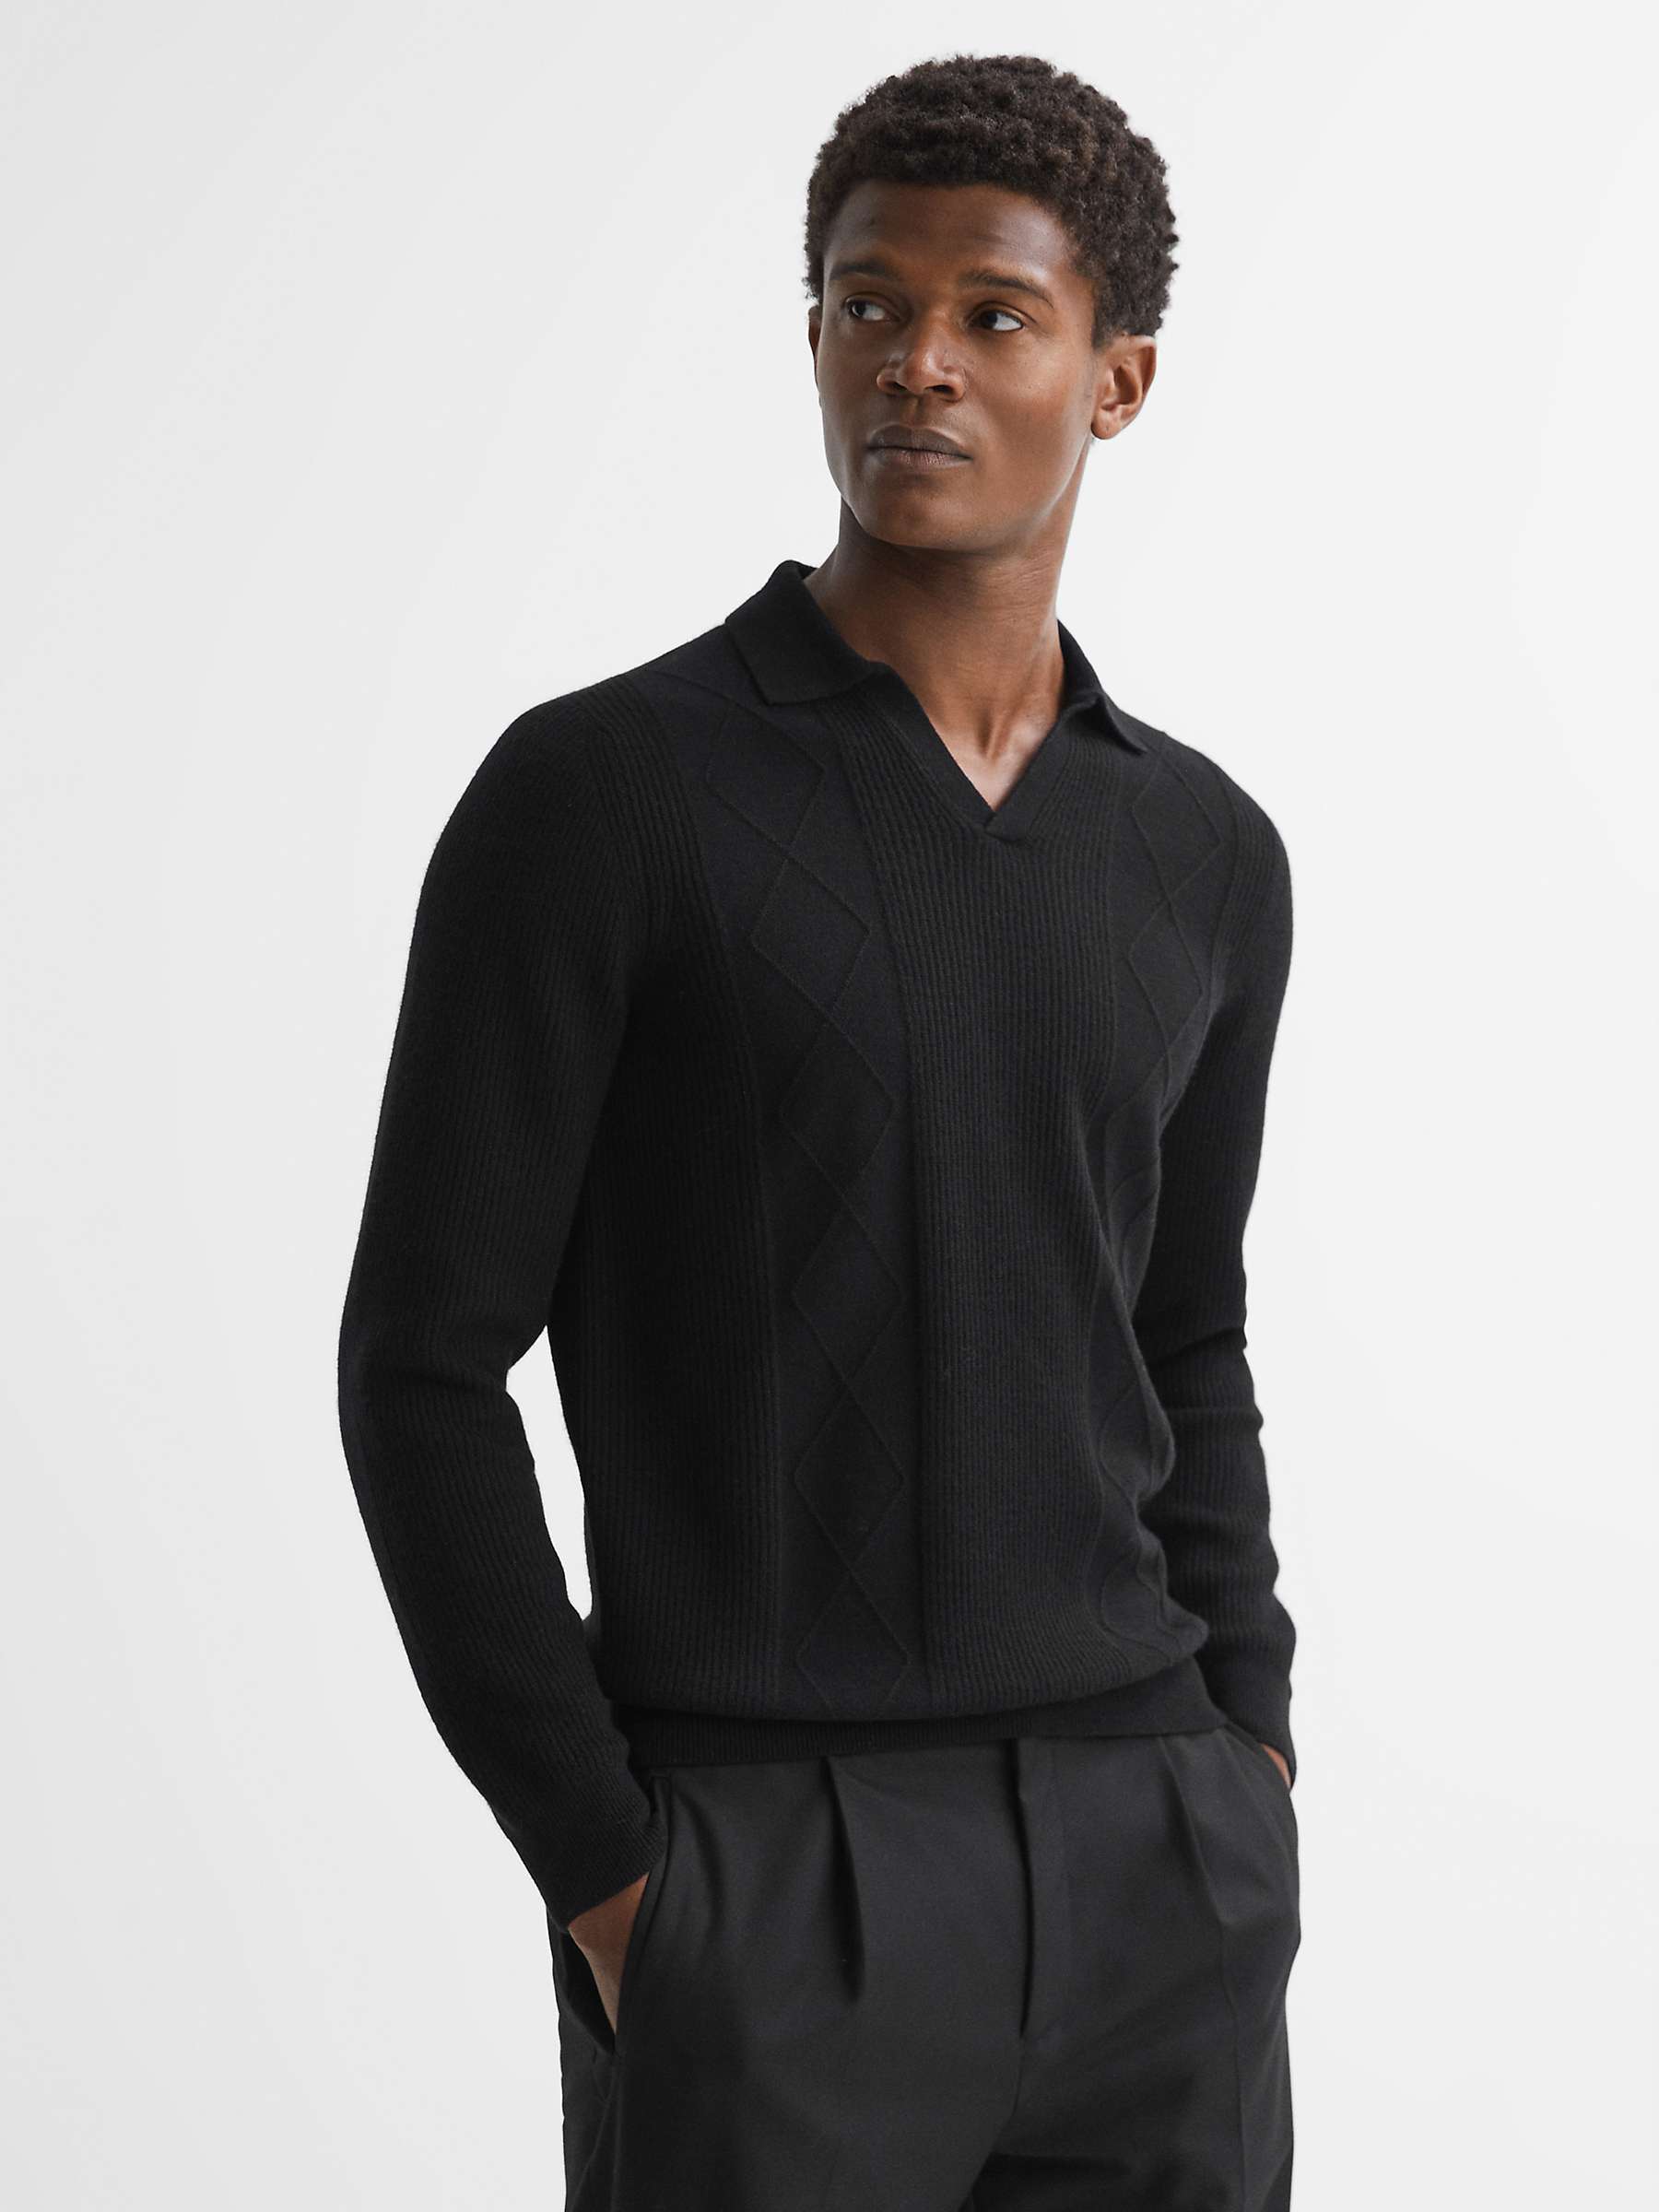 Buy Reiss Malik Long Sleeve Knitted Polo Shirt Online at johnlewis.com